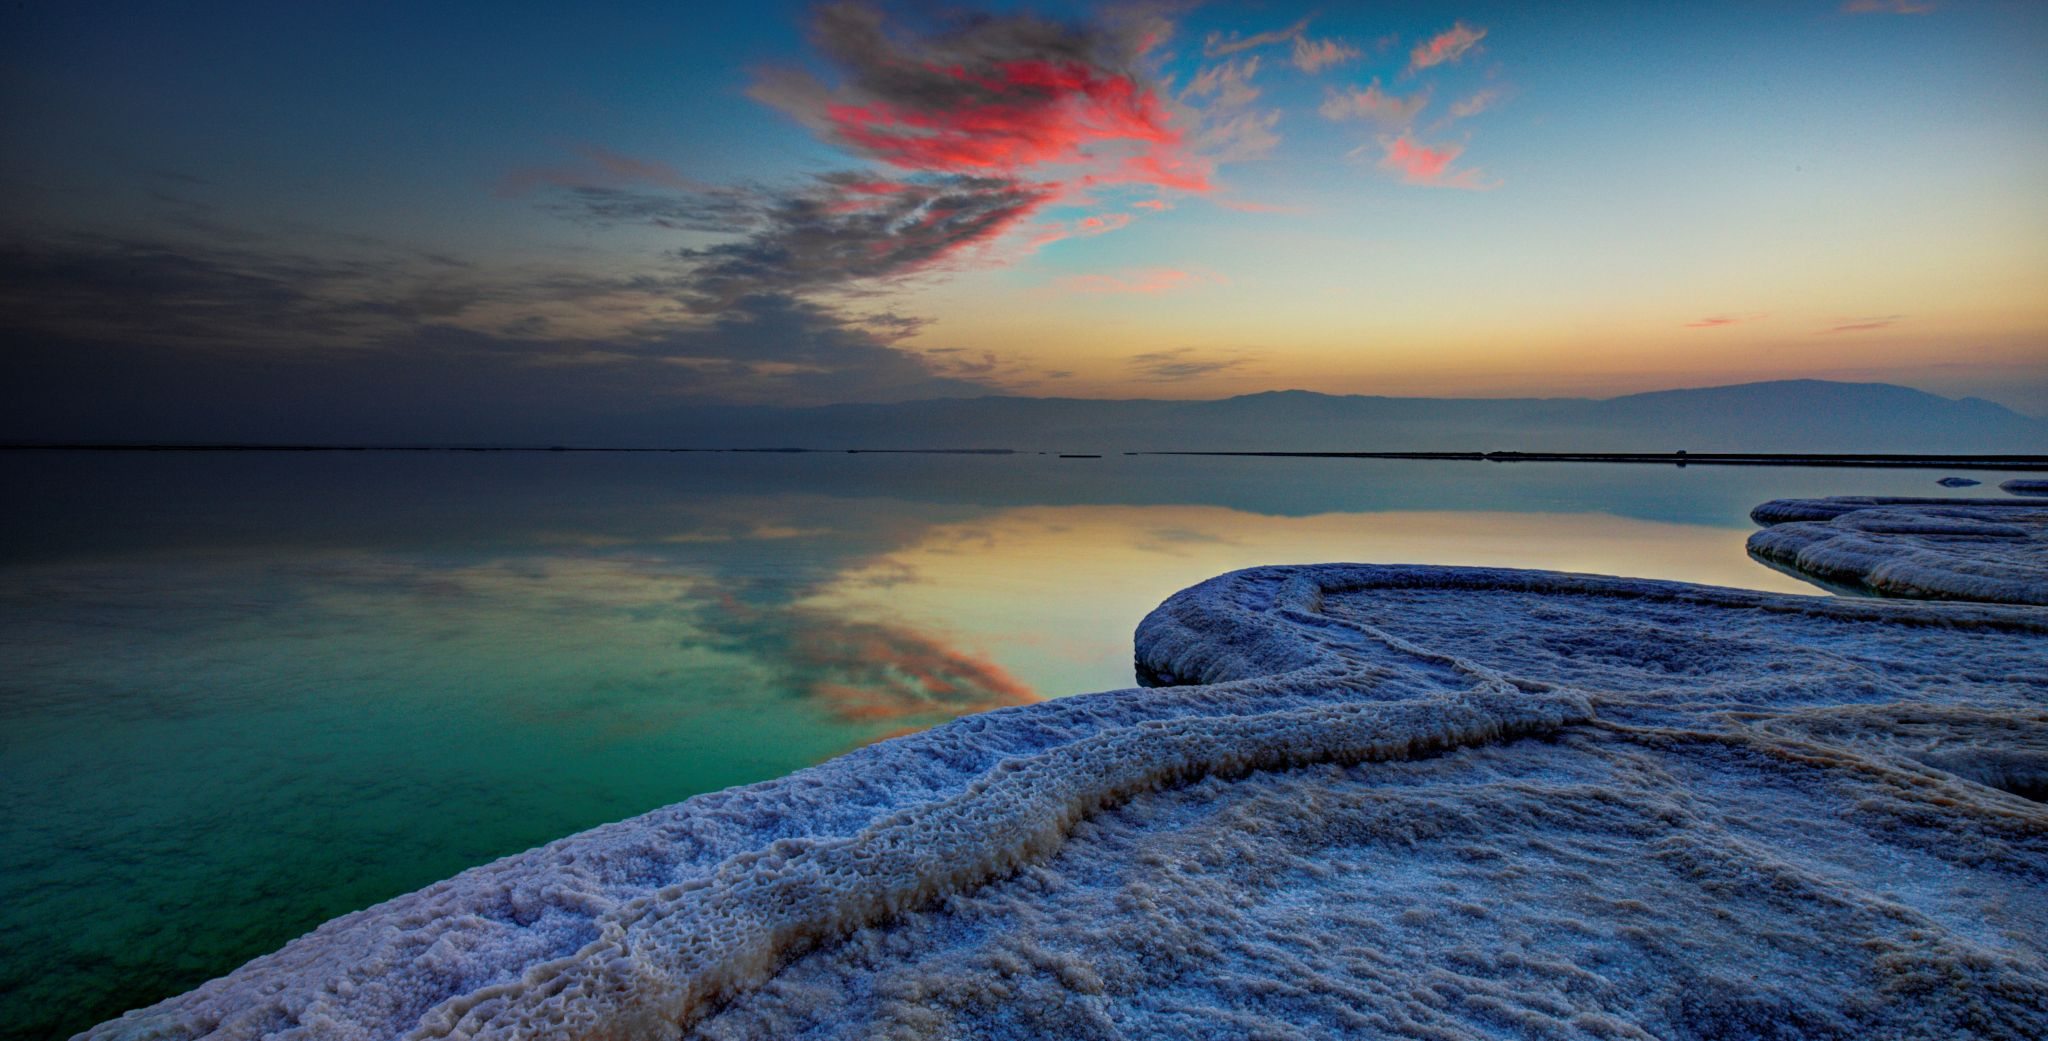 dead sea - Top Spots for this Photo Theme